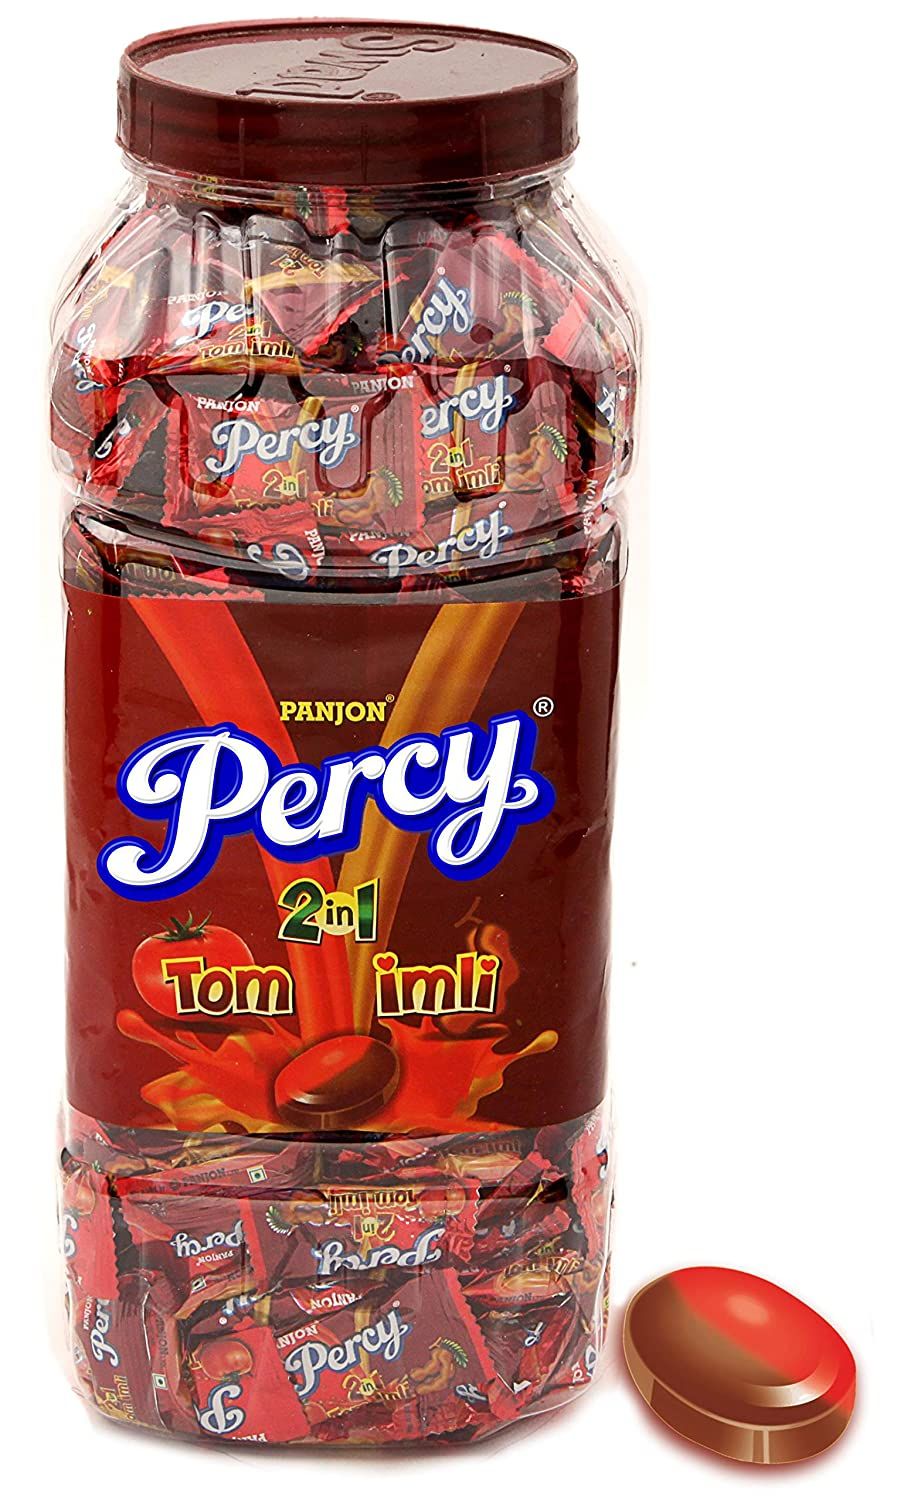 Percy 2 in 1 Toffee Tom & Imli Candy Chocolate Image